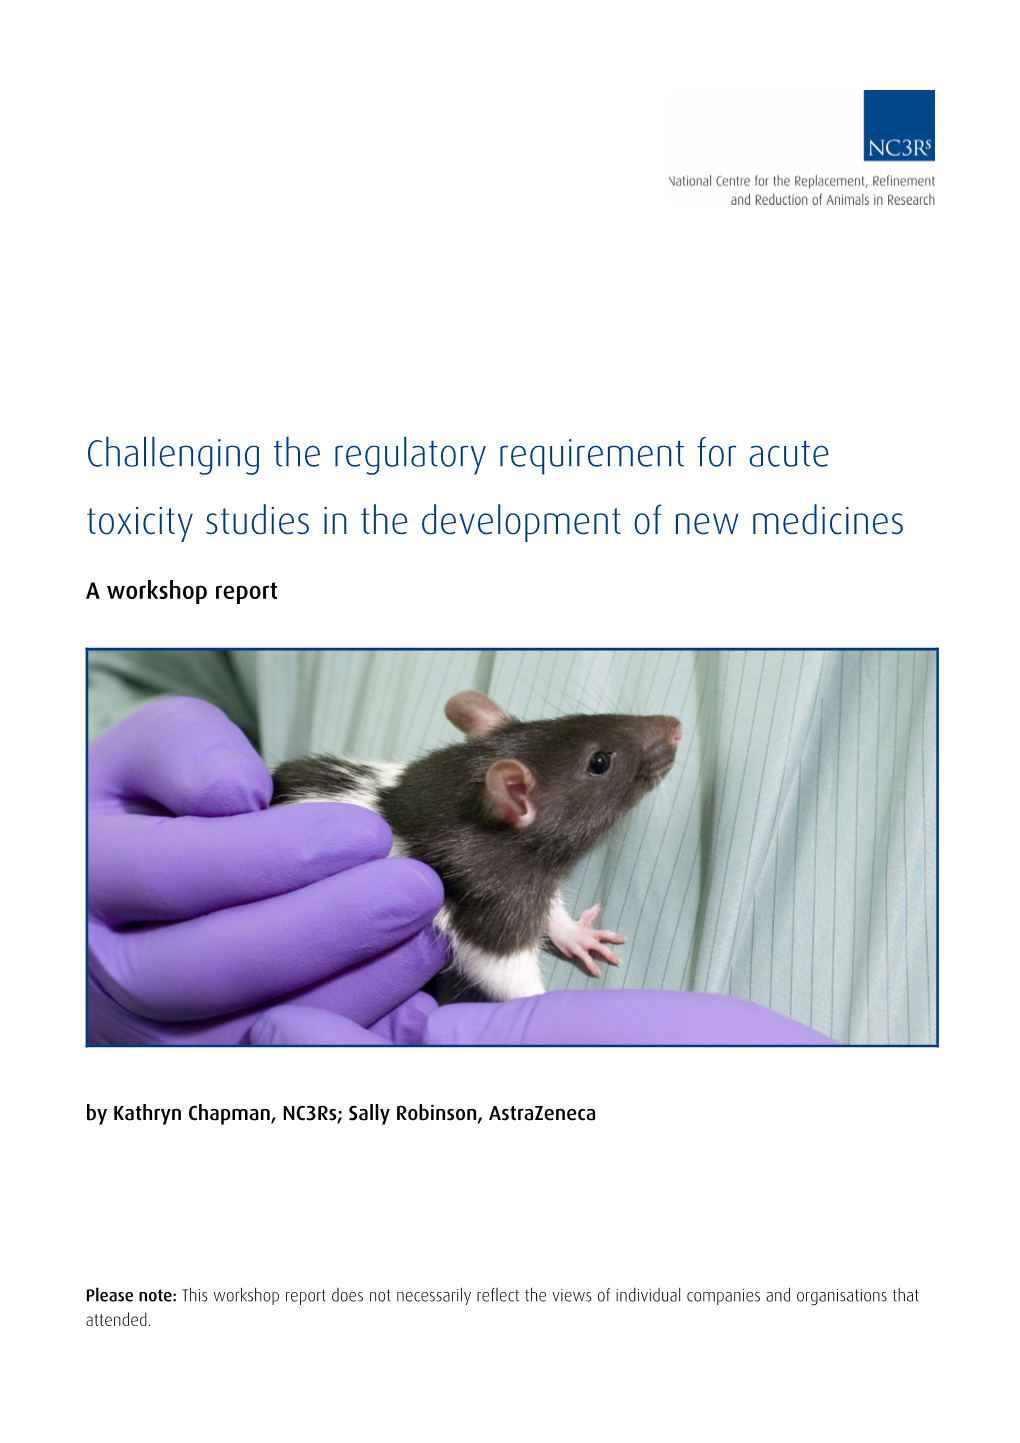 Challenging the Regulatory Requirement for Acute Toxicity Studies in the Development of New Medicines